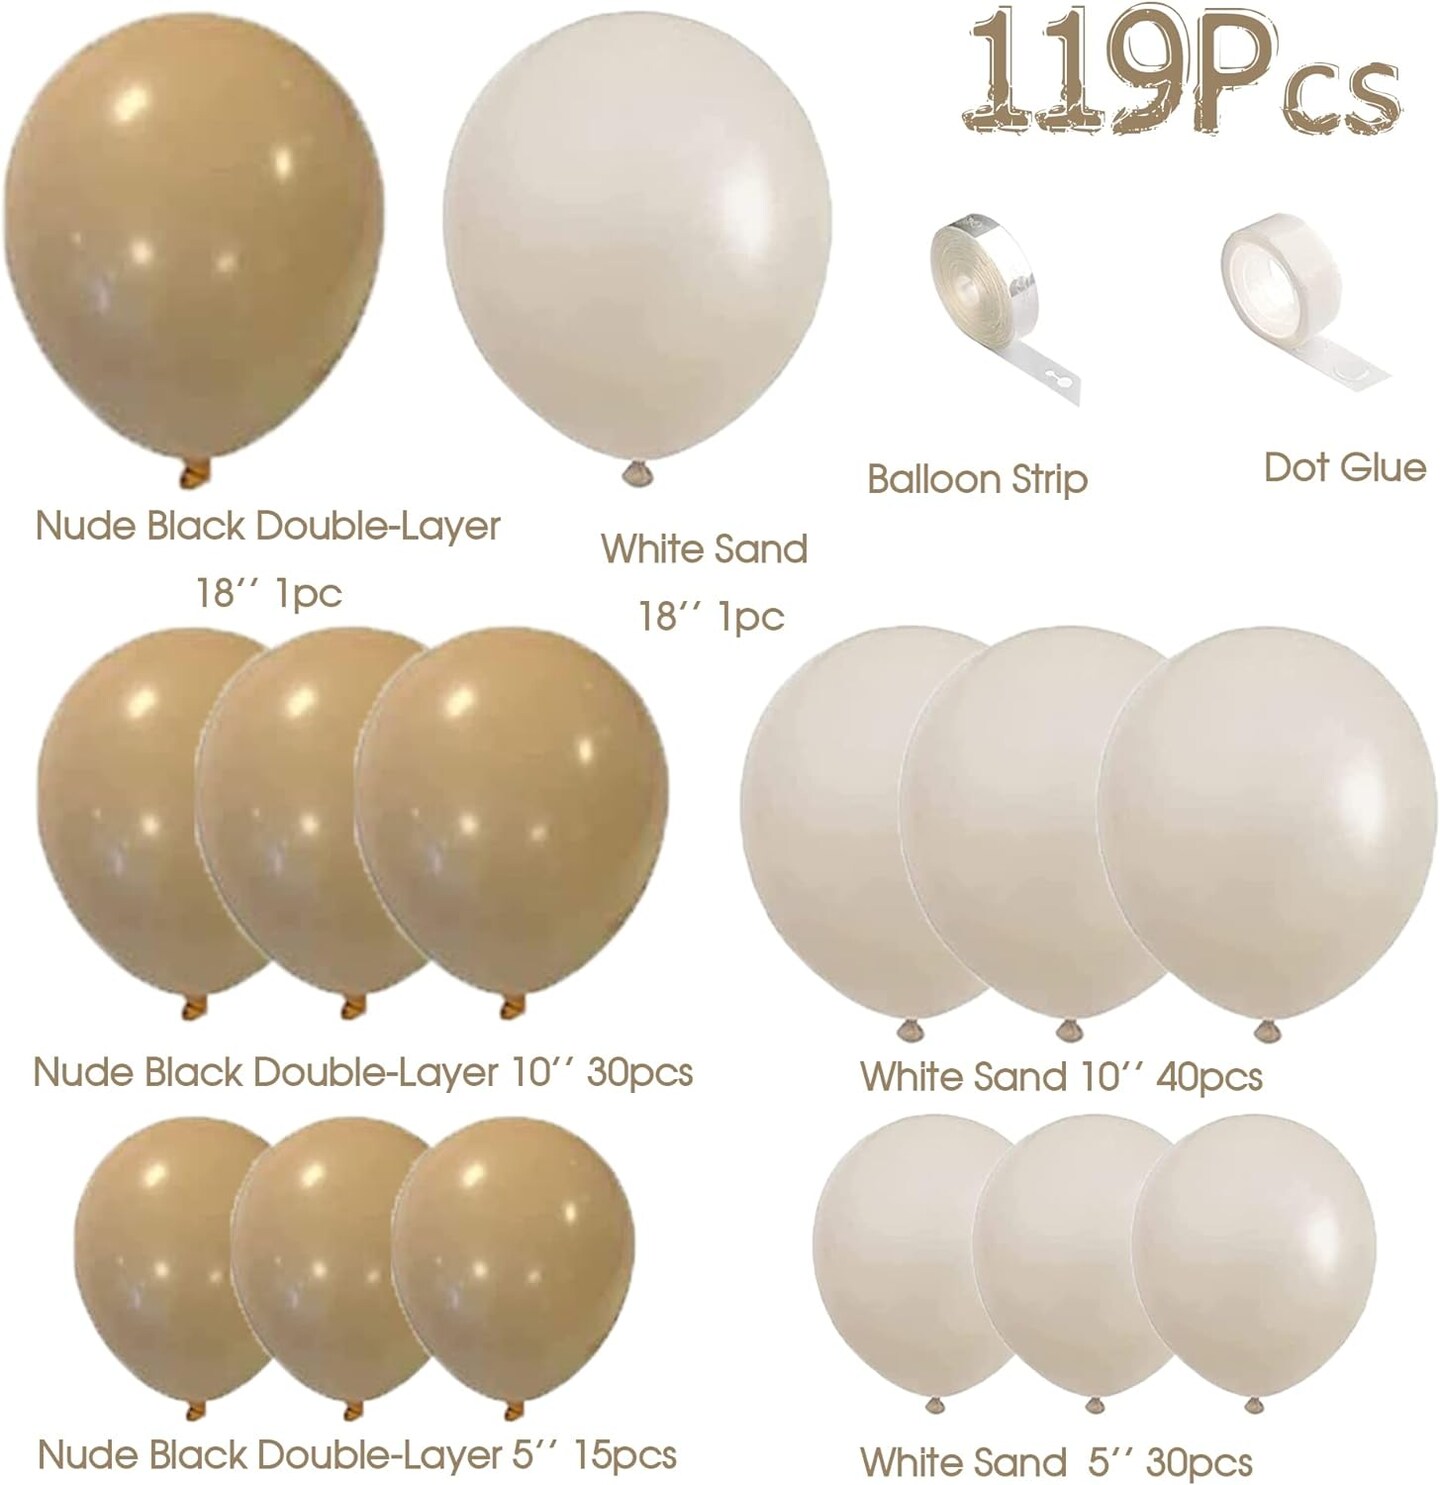 Neutral Balloon Garland Arch Kit-119Pcs Tan Beige Double Stuffed Balloons White Sand Cream for Boho Teddy Bear Theme Baby Shower Gender Reveal Birthday Party Decoration Supplies